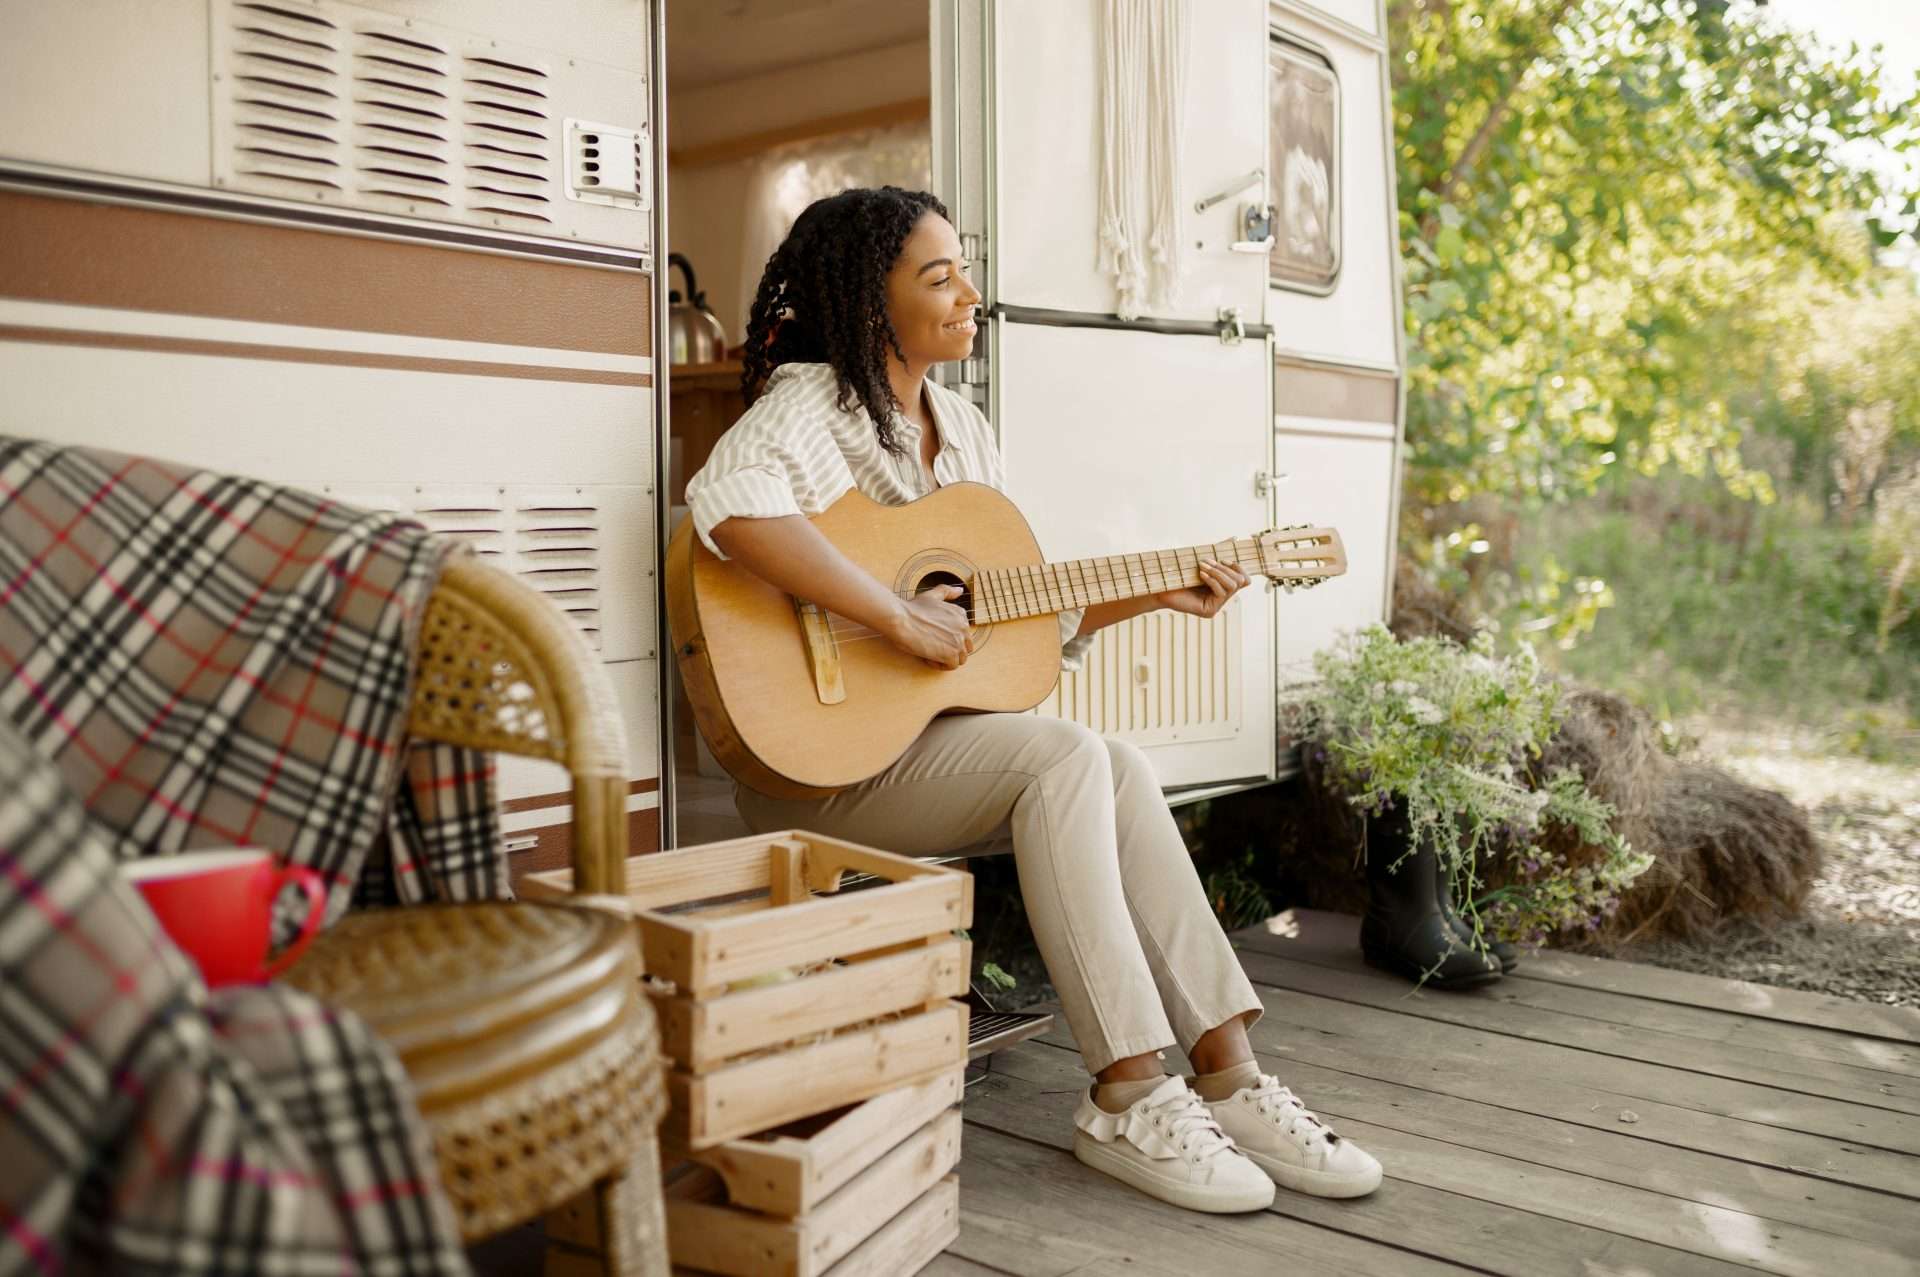 Woman playing guitar while sitting on RV porch